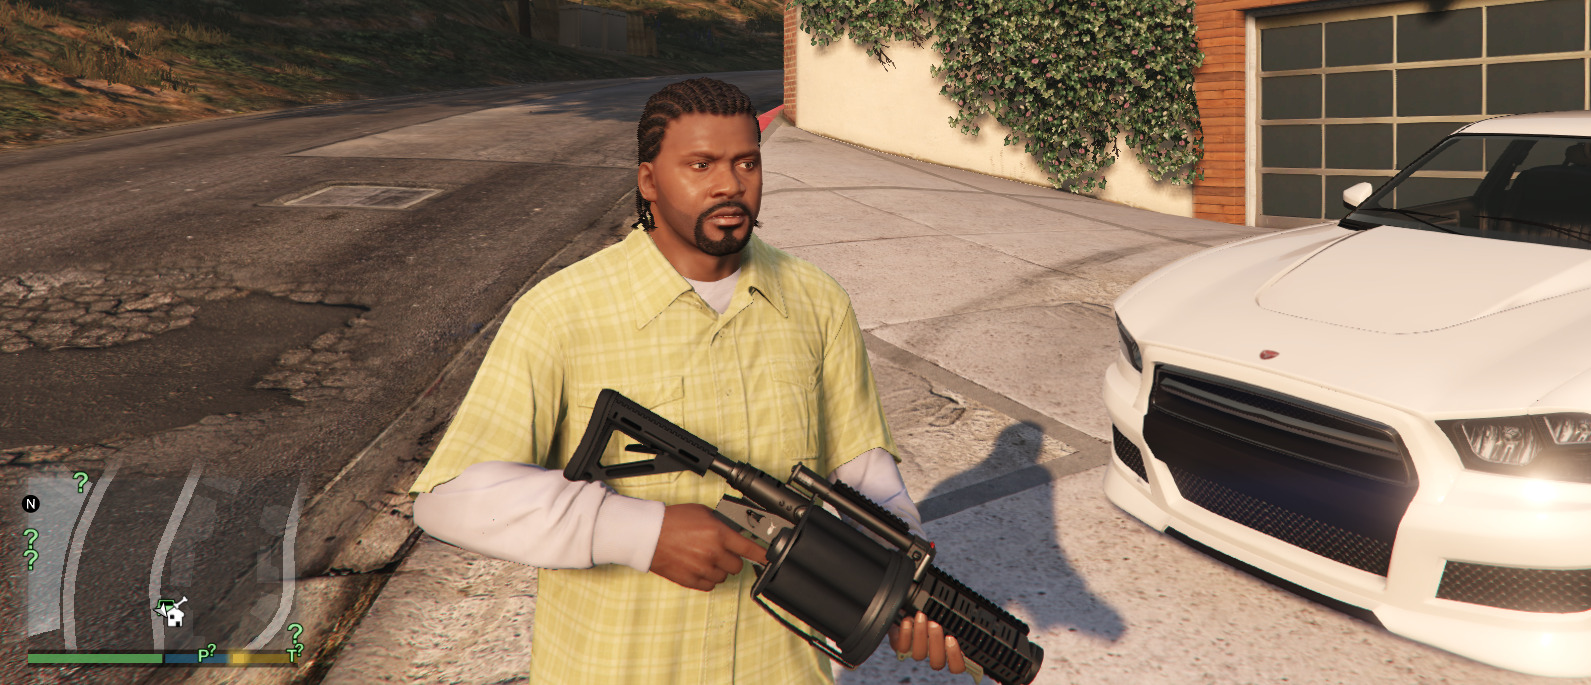 A screenshot showing a GTA 5 character holding a weapon